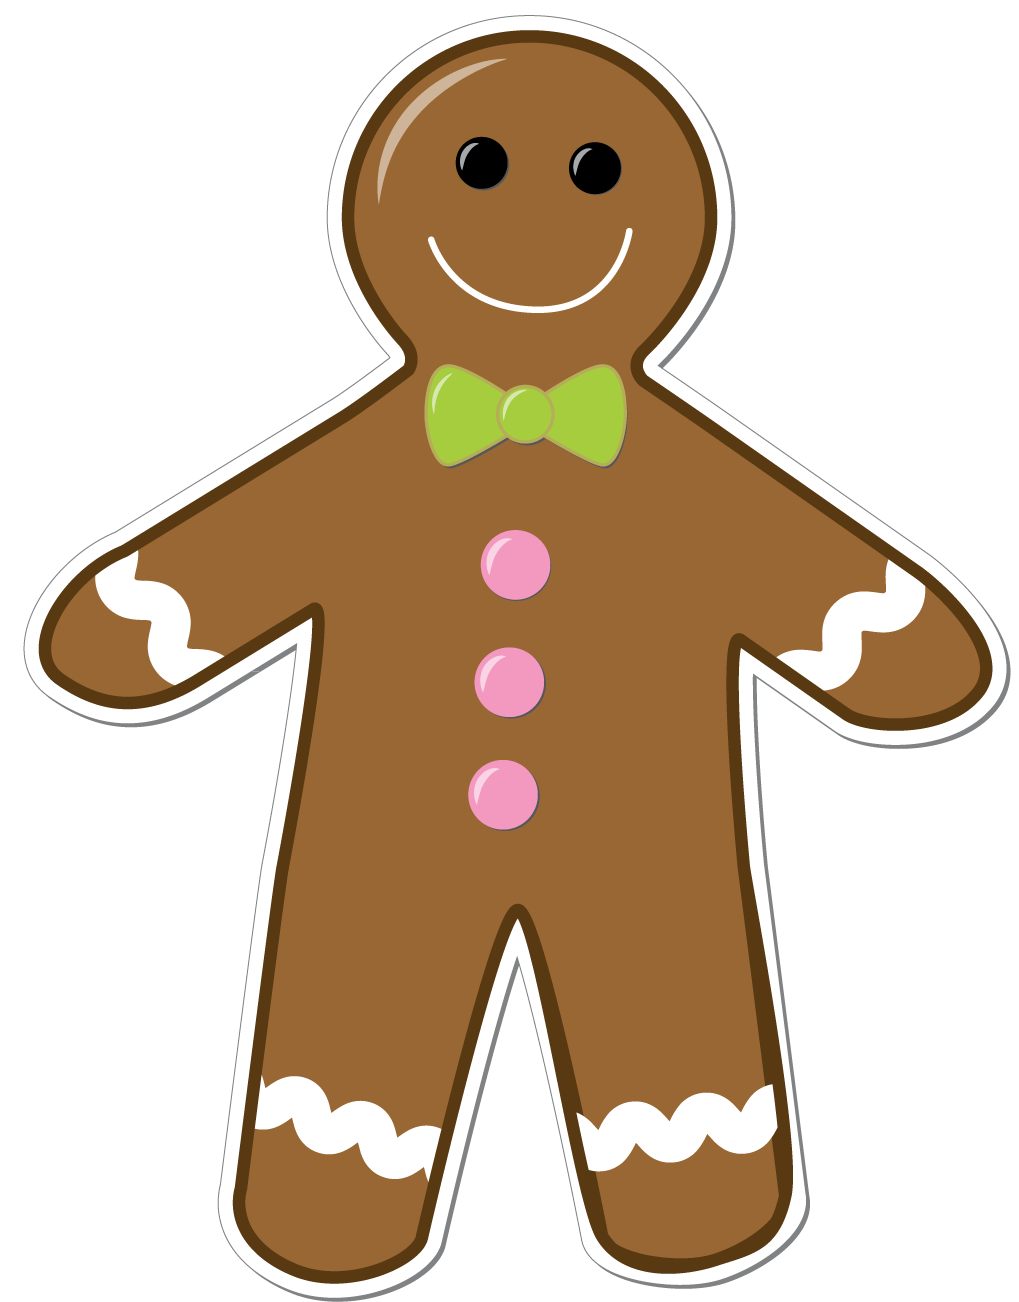 Clip Arts Related To : gingerbread man clipart. 